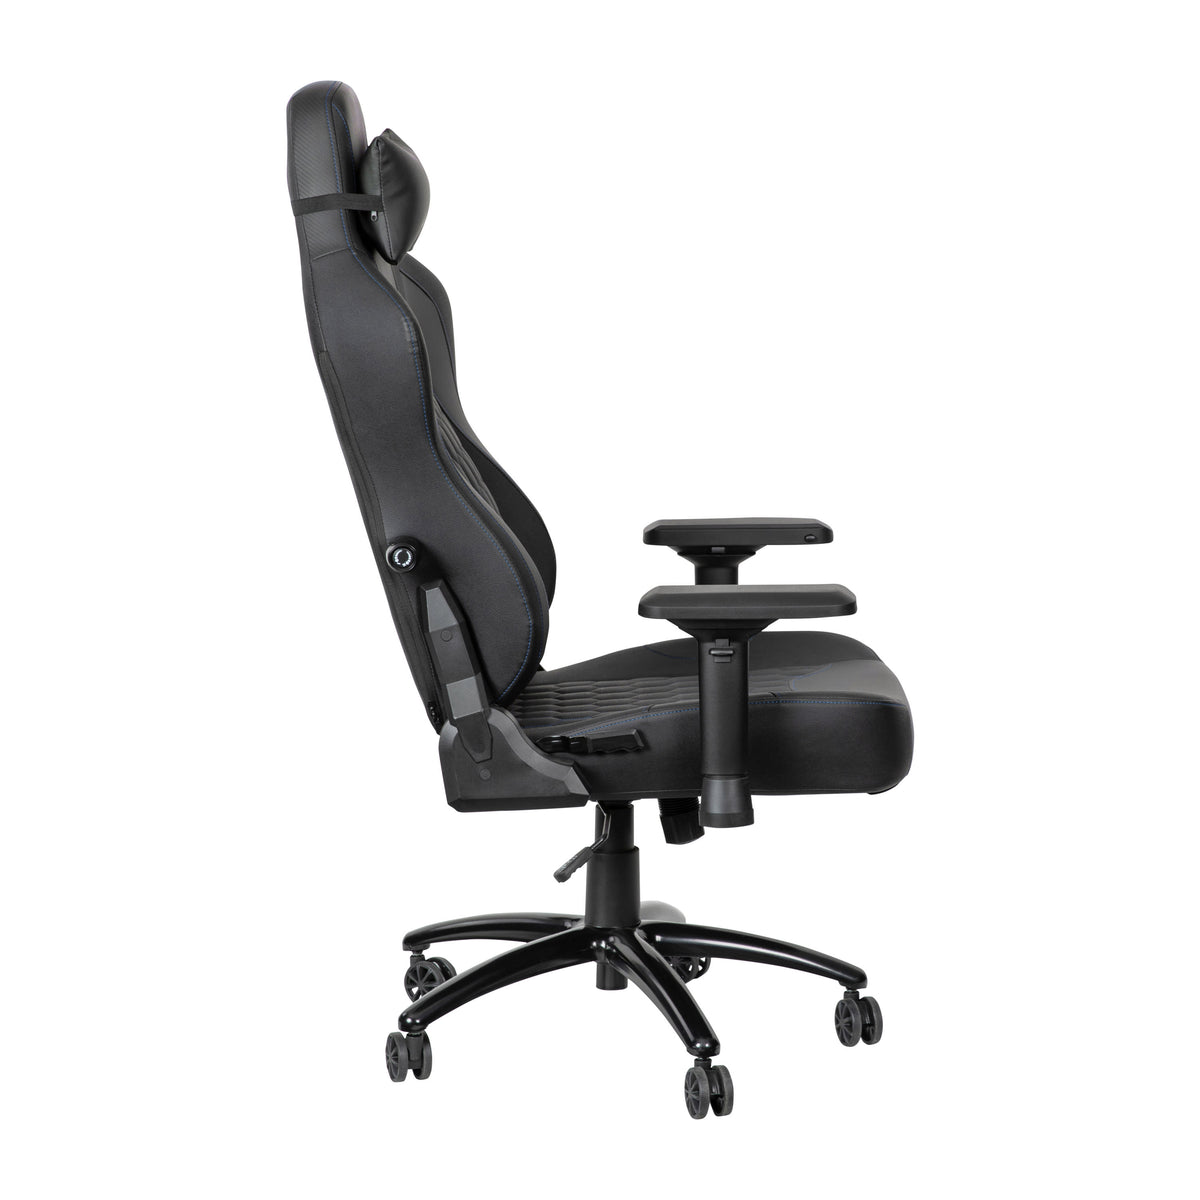 Black with Blue Trim |#| 4D Ergonomic Gaming Chair with Head Pillow and Lumbar Support - Black/Blue